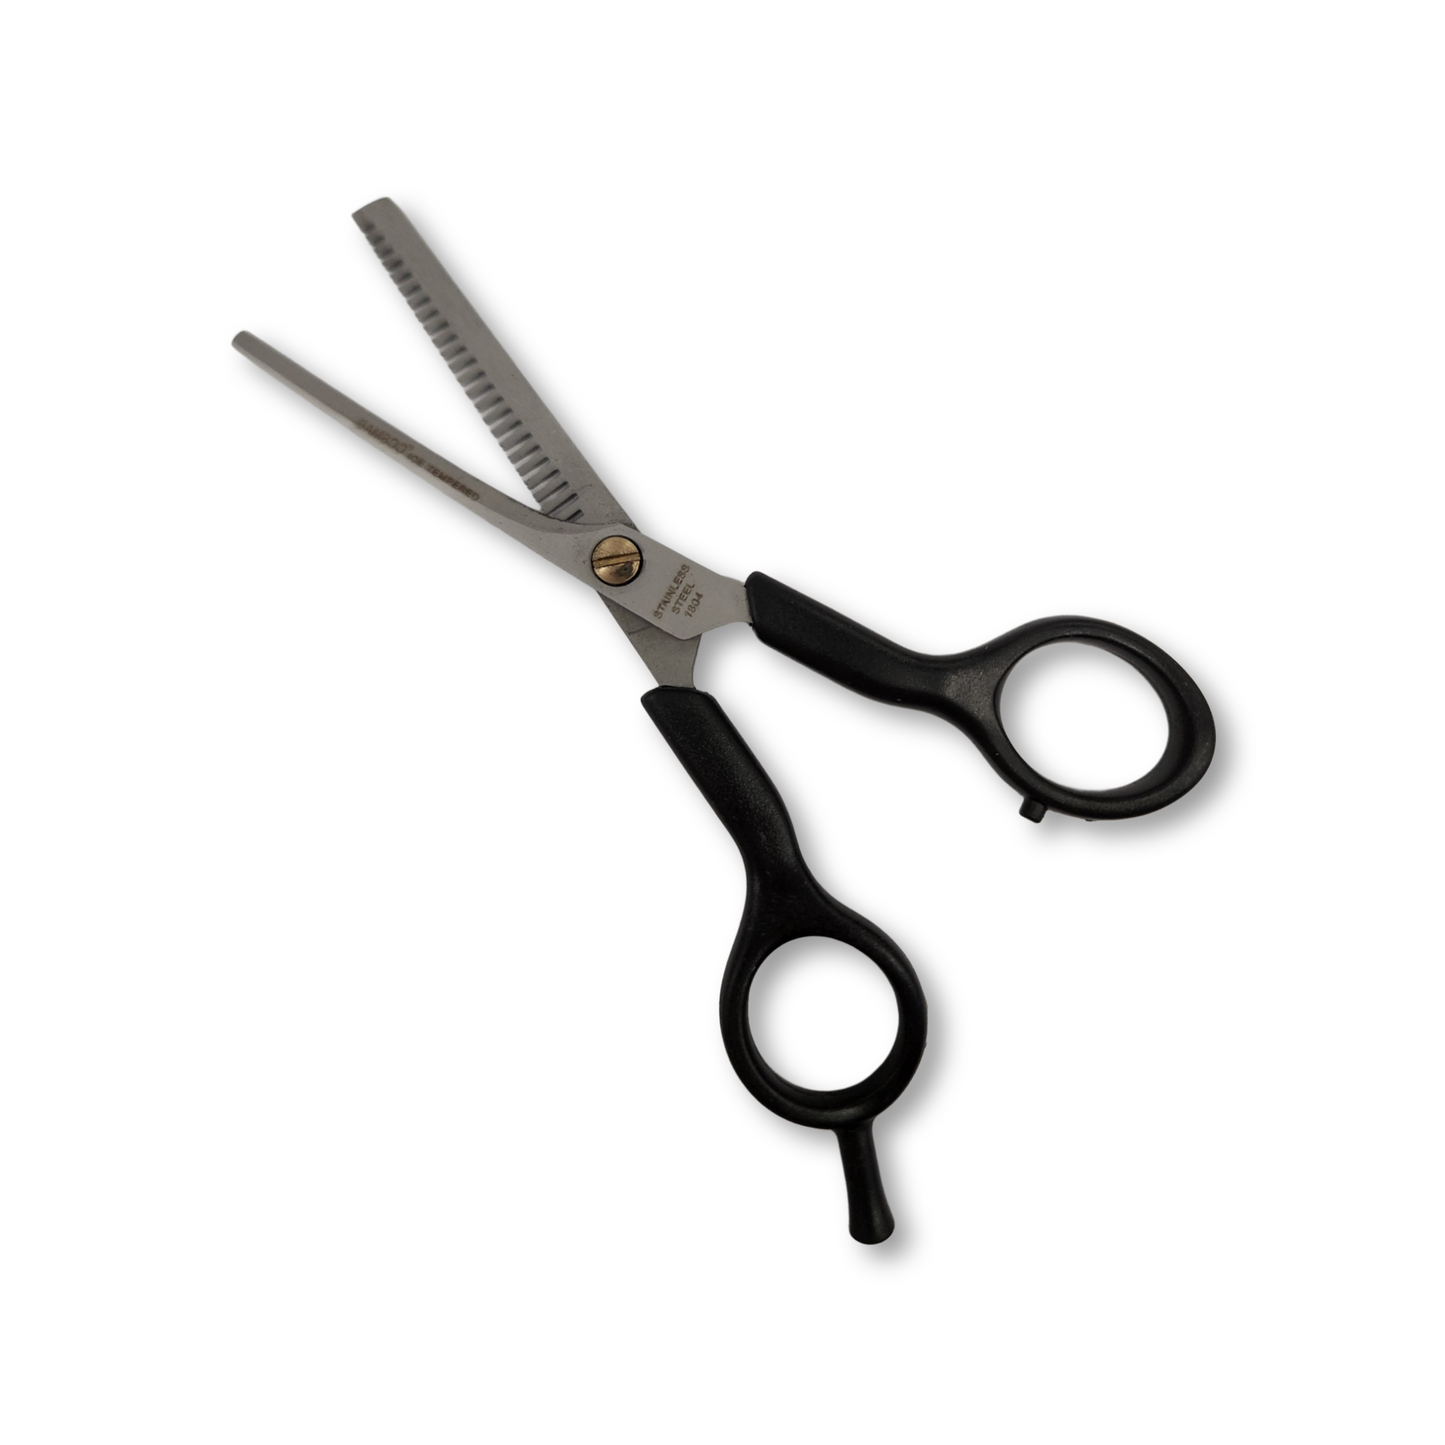 Basic Stainless Steel Barber's Scissors with Teeth